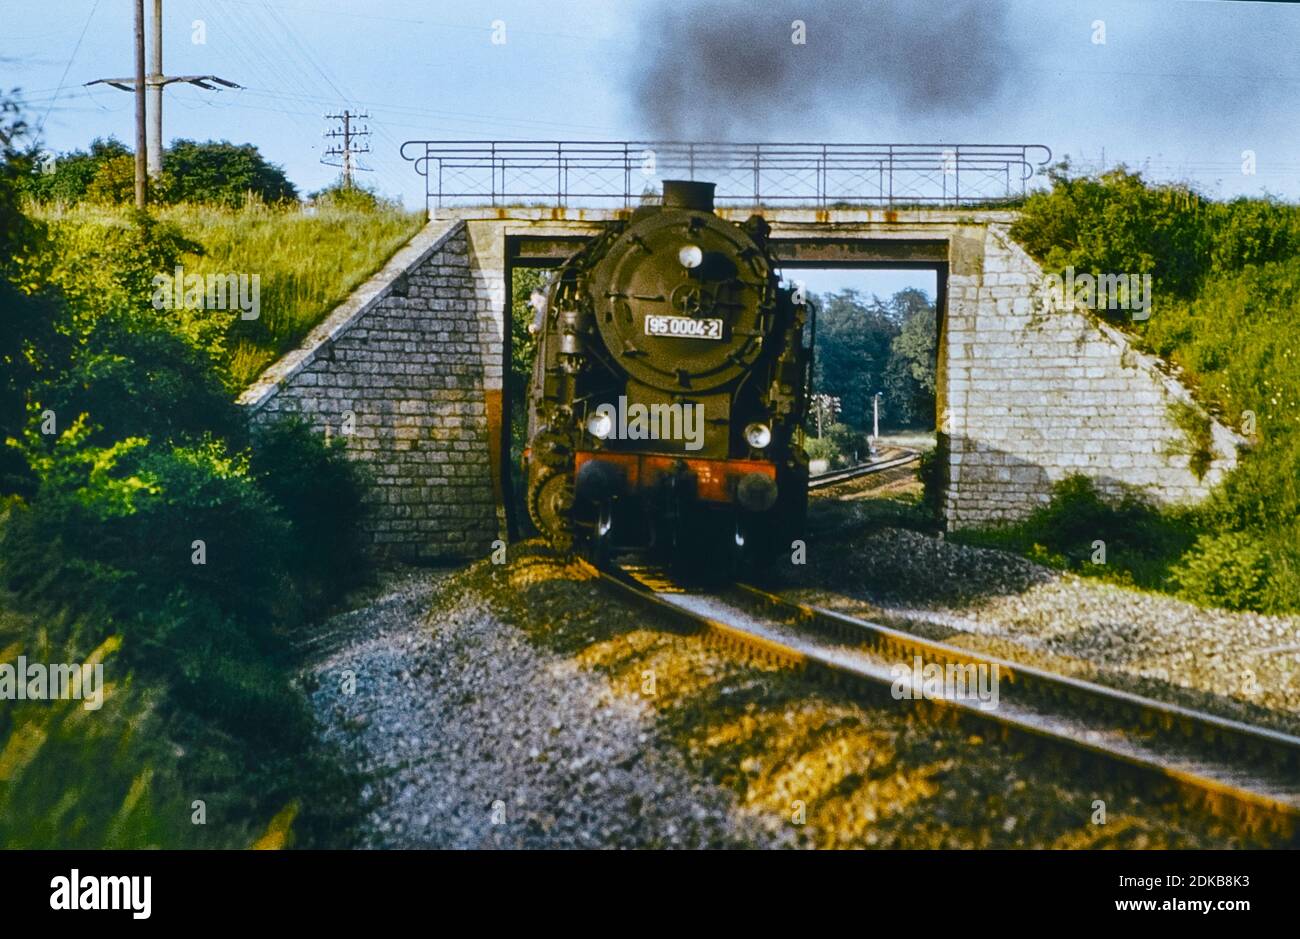 Freight Tender Locomotive 95 0004 With A Passenger Train Near Oppurg In July 1979, Thuringia, GDR, Germany, Europe Stock Photo